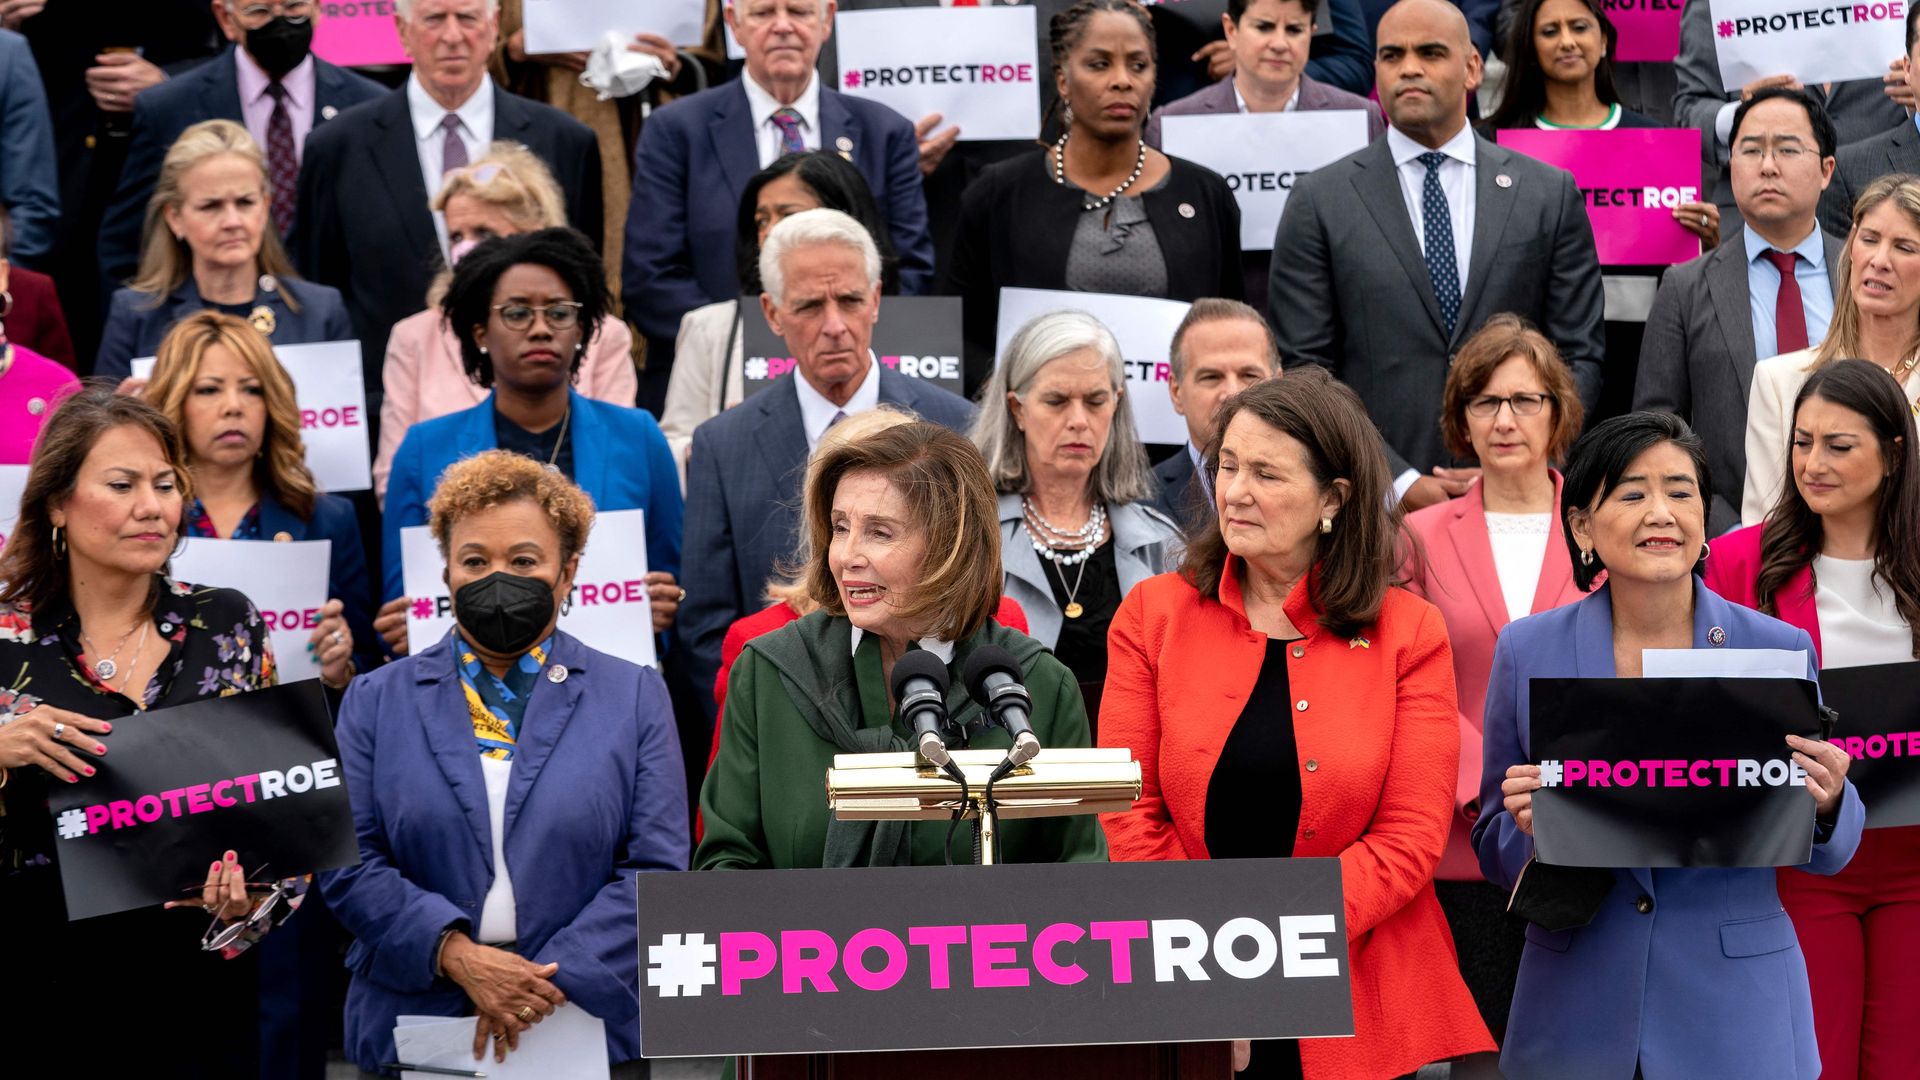 Photo of Nancy Pelosi speaking from a podium with a sign that says "#ProtectRoe" as other Congress members stand behind her